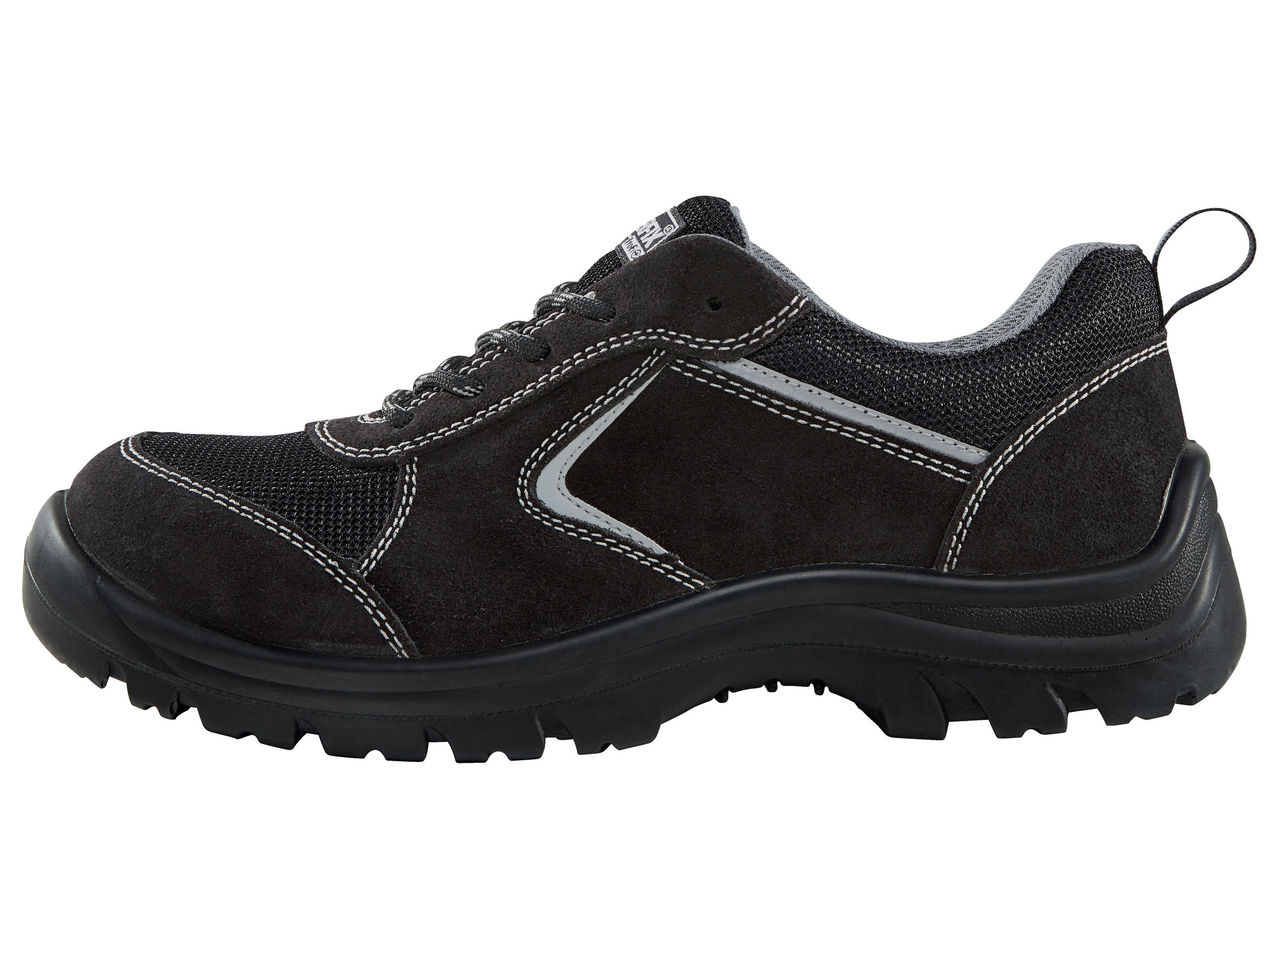 Mens' S1 Leather Safety Shoes